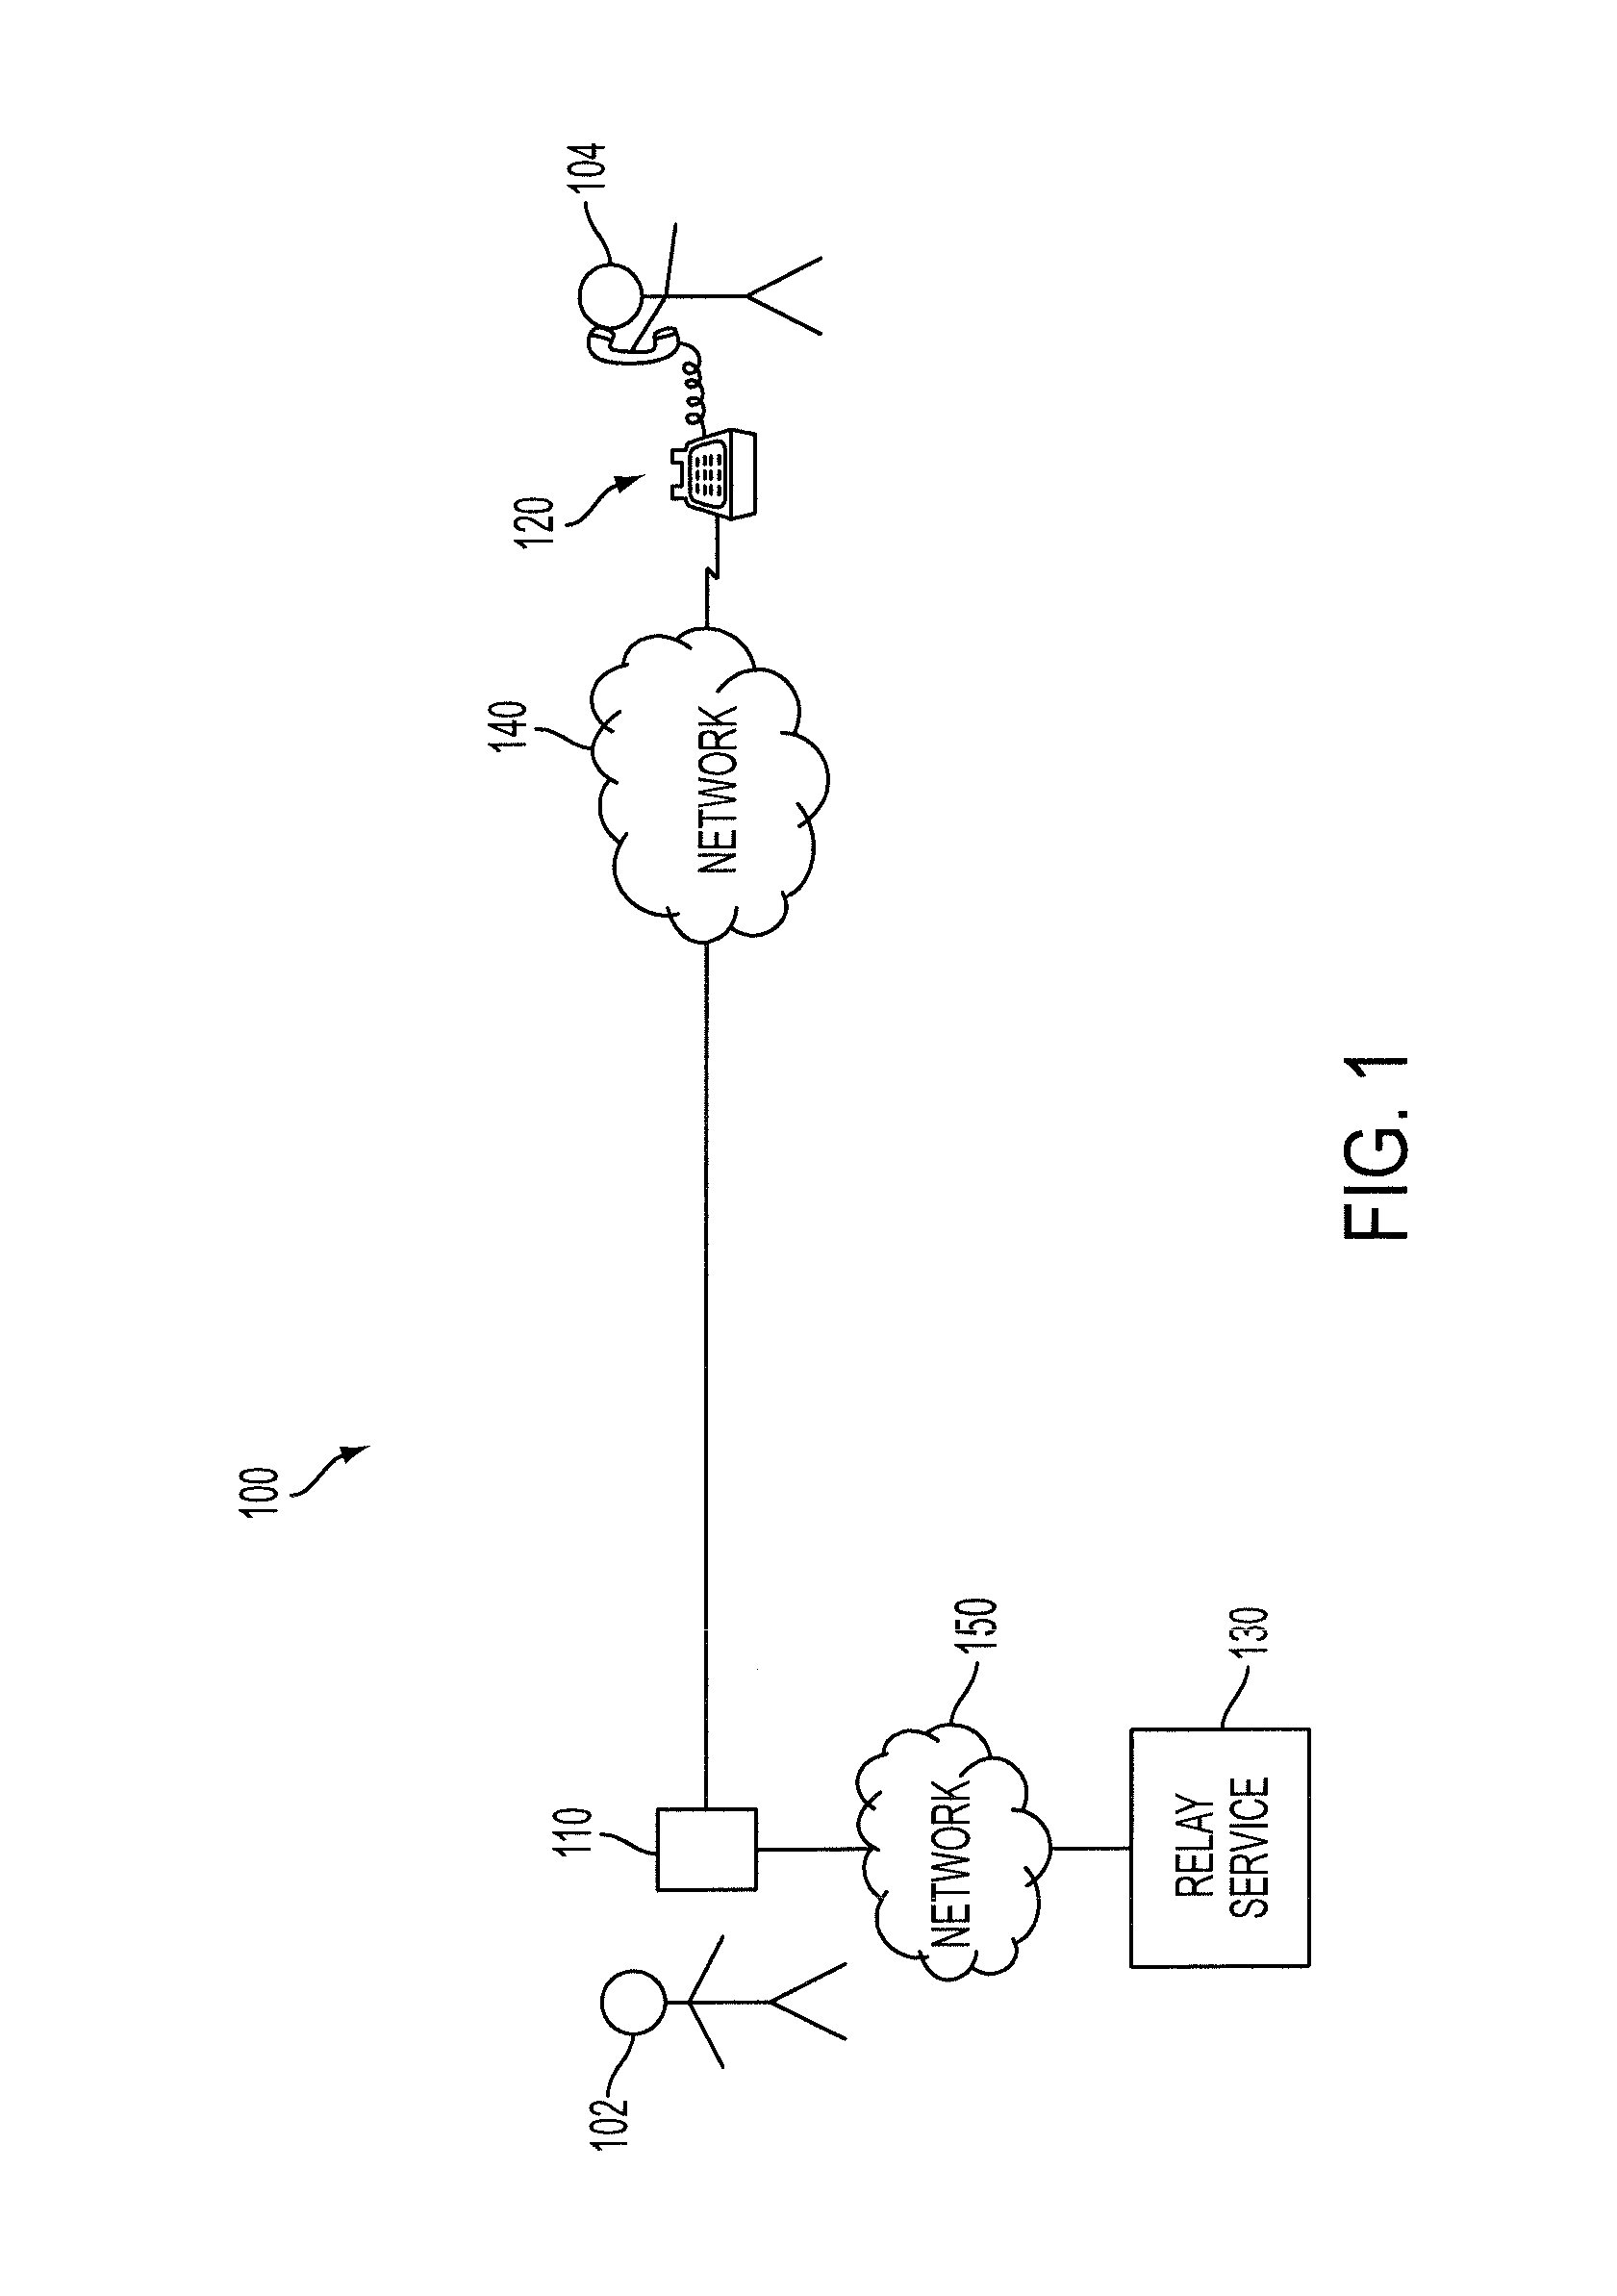 Apparatuses and methods for routing digital voice data in a communication system for hearing-impaired users